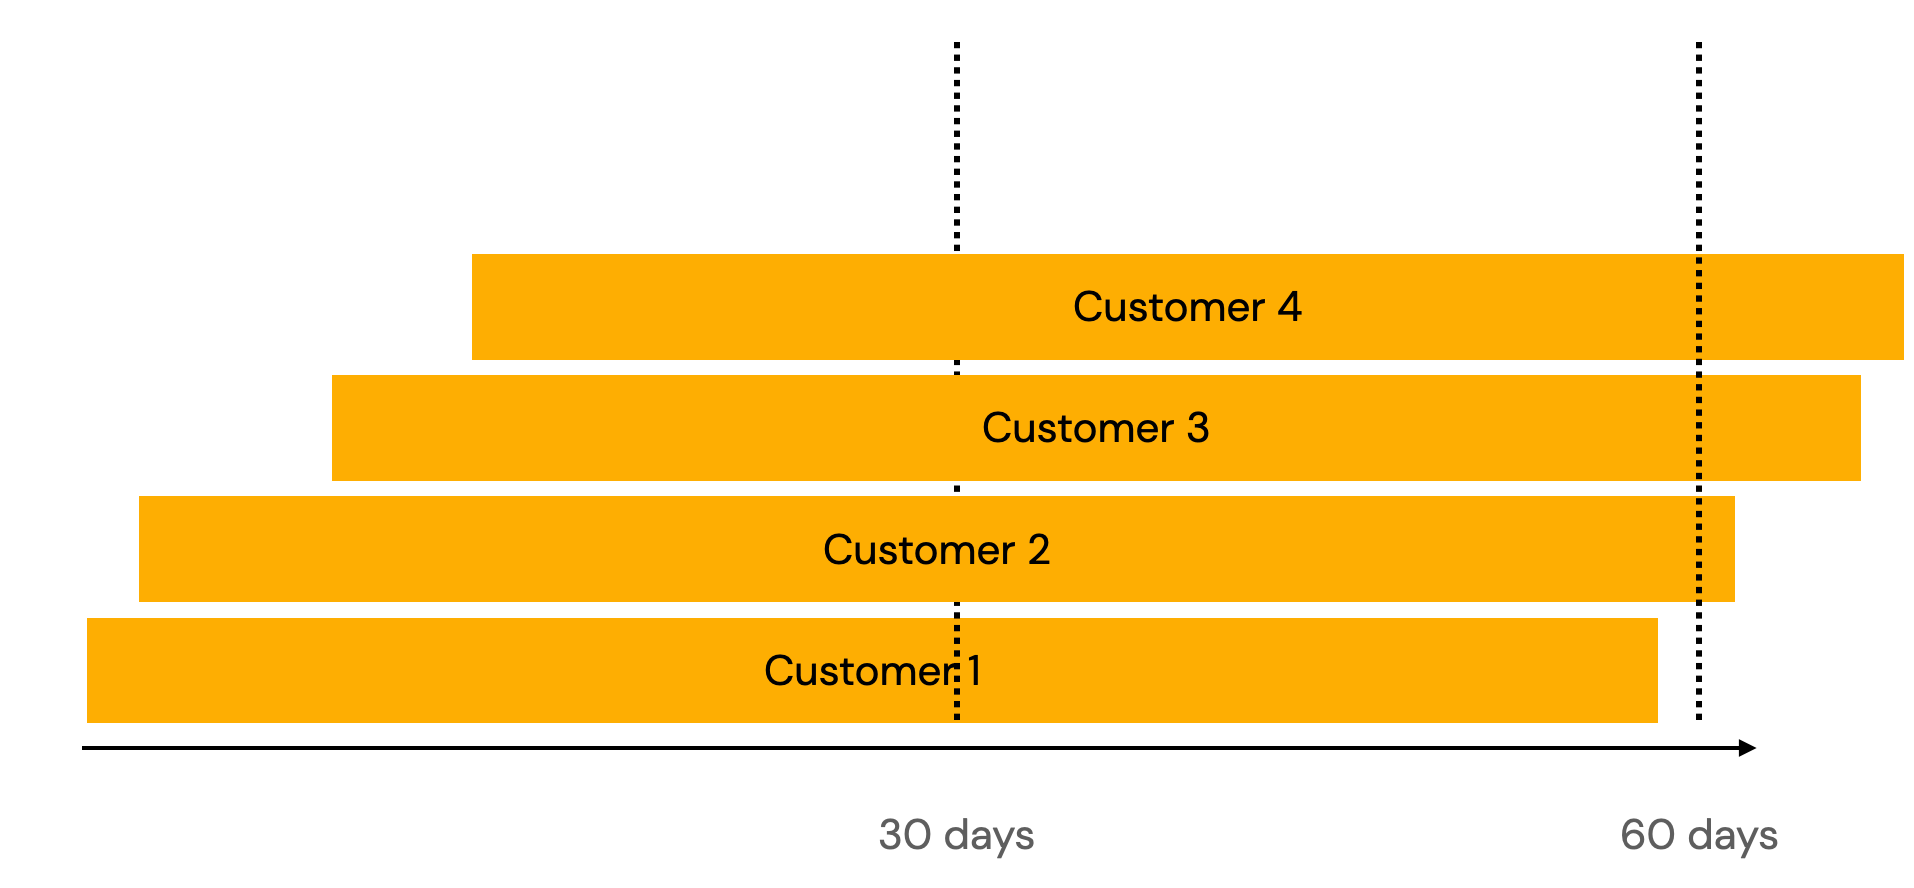 another chart with four customers, but now three of those customers will take more than 60 days to close